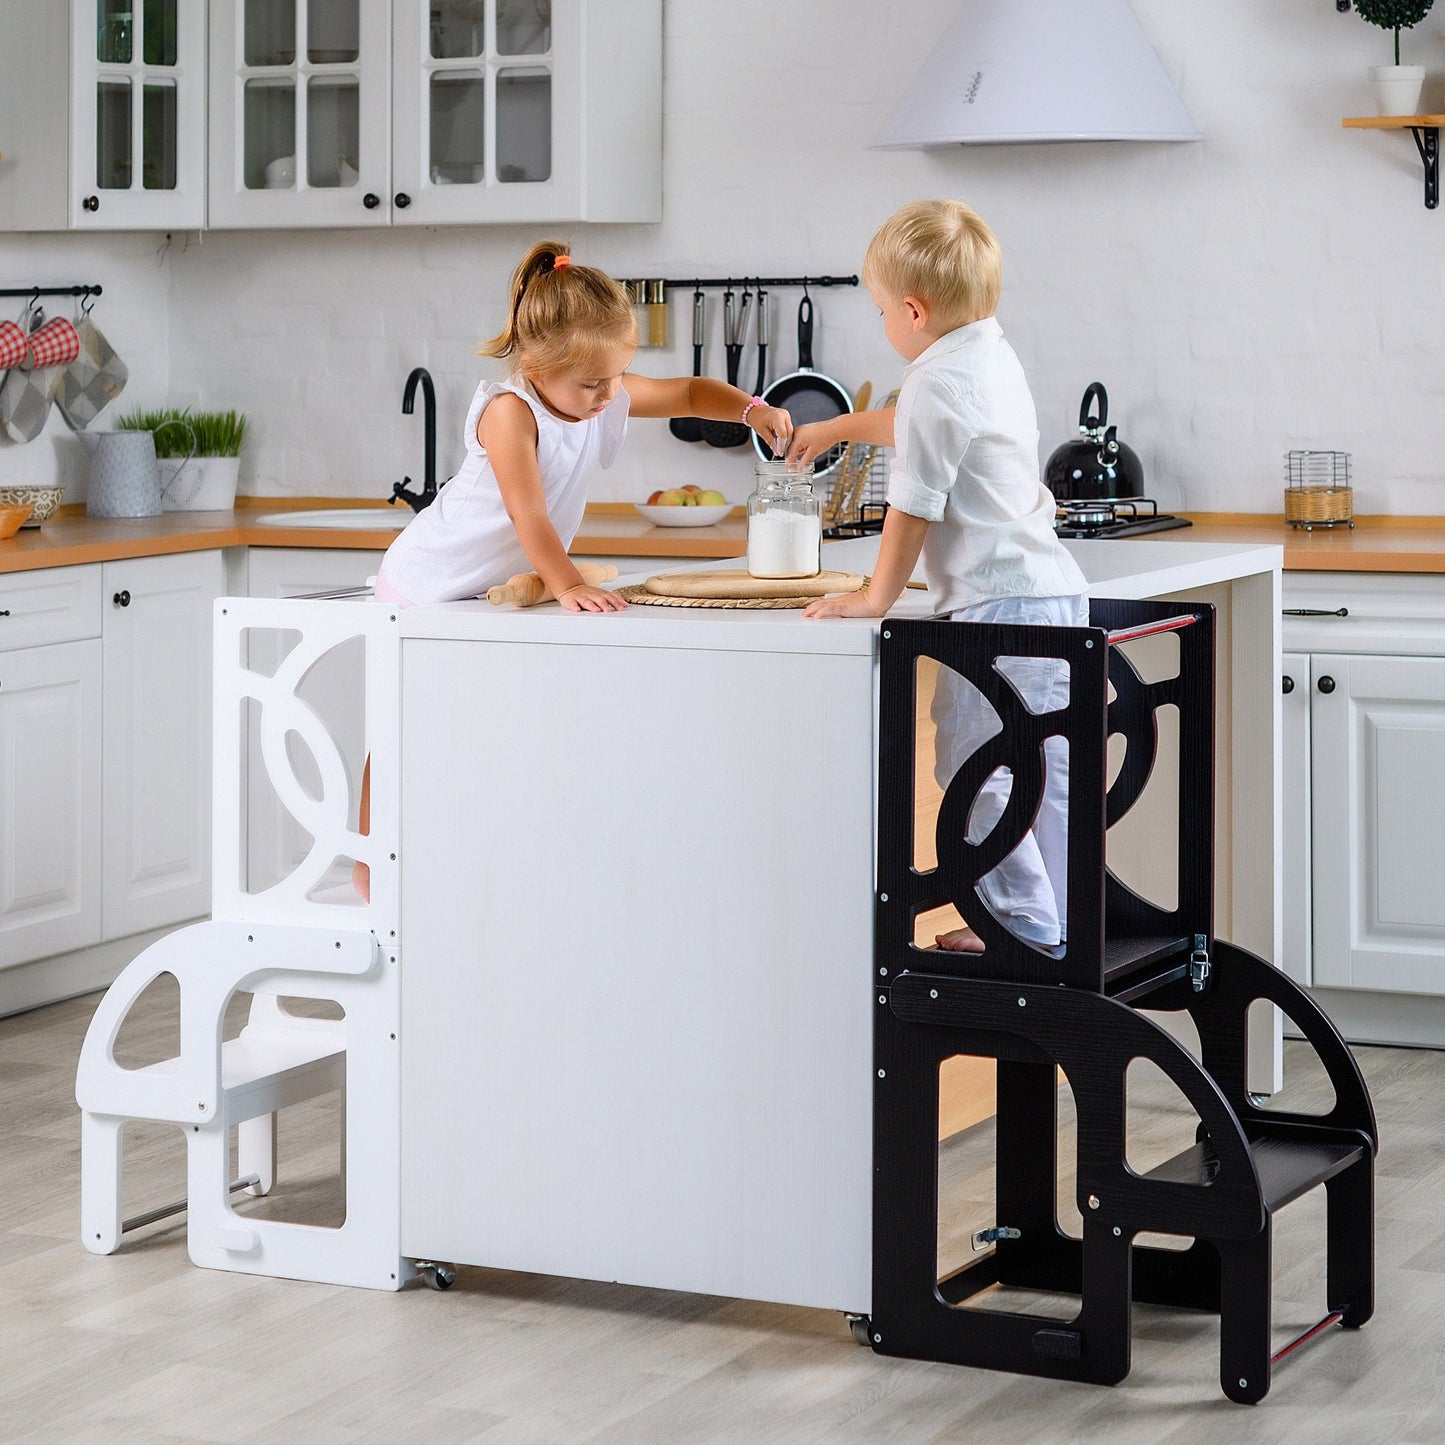 Natural Convertible learning toddler tower & table WITH BACK, toddler kitchen helper stool